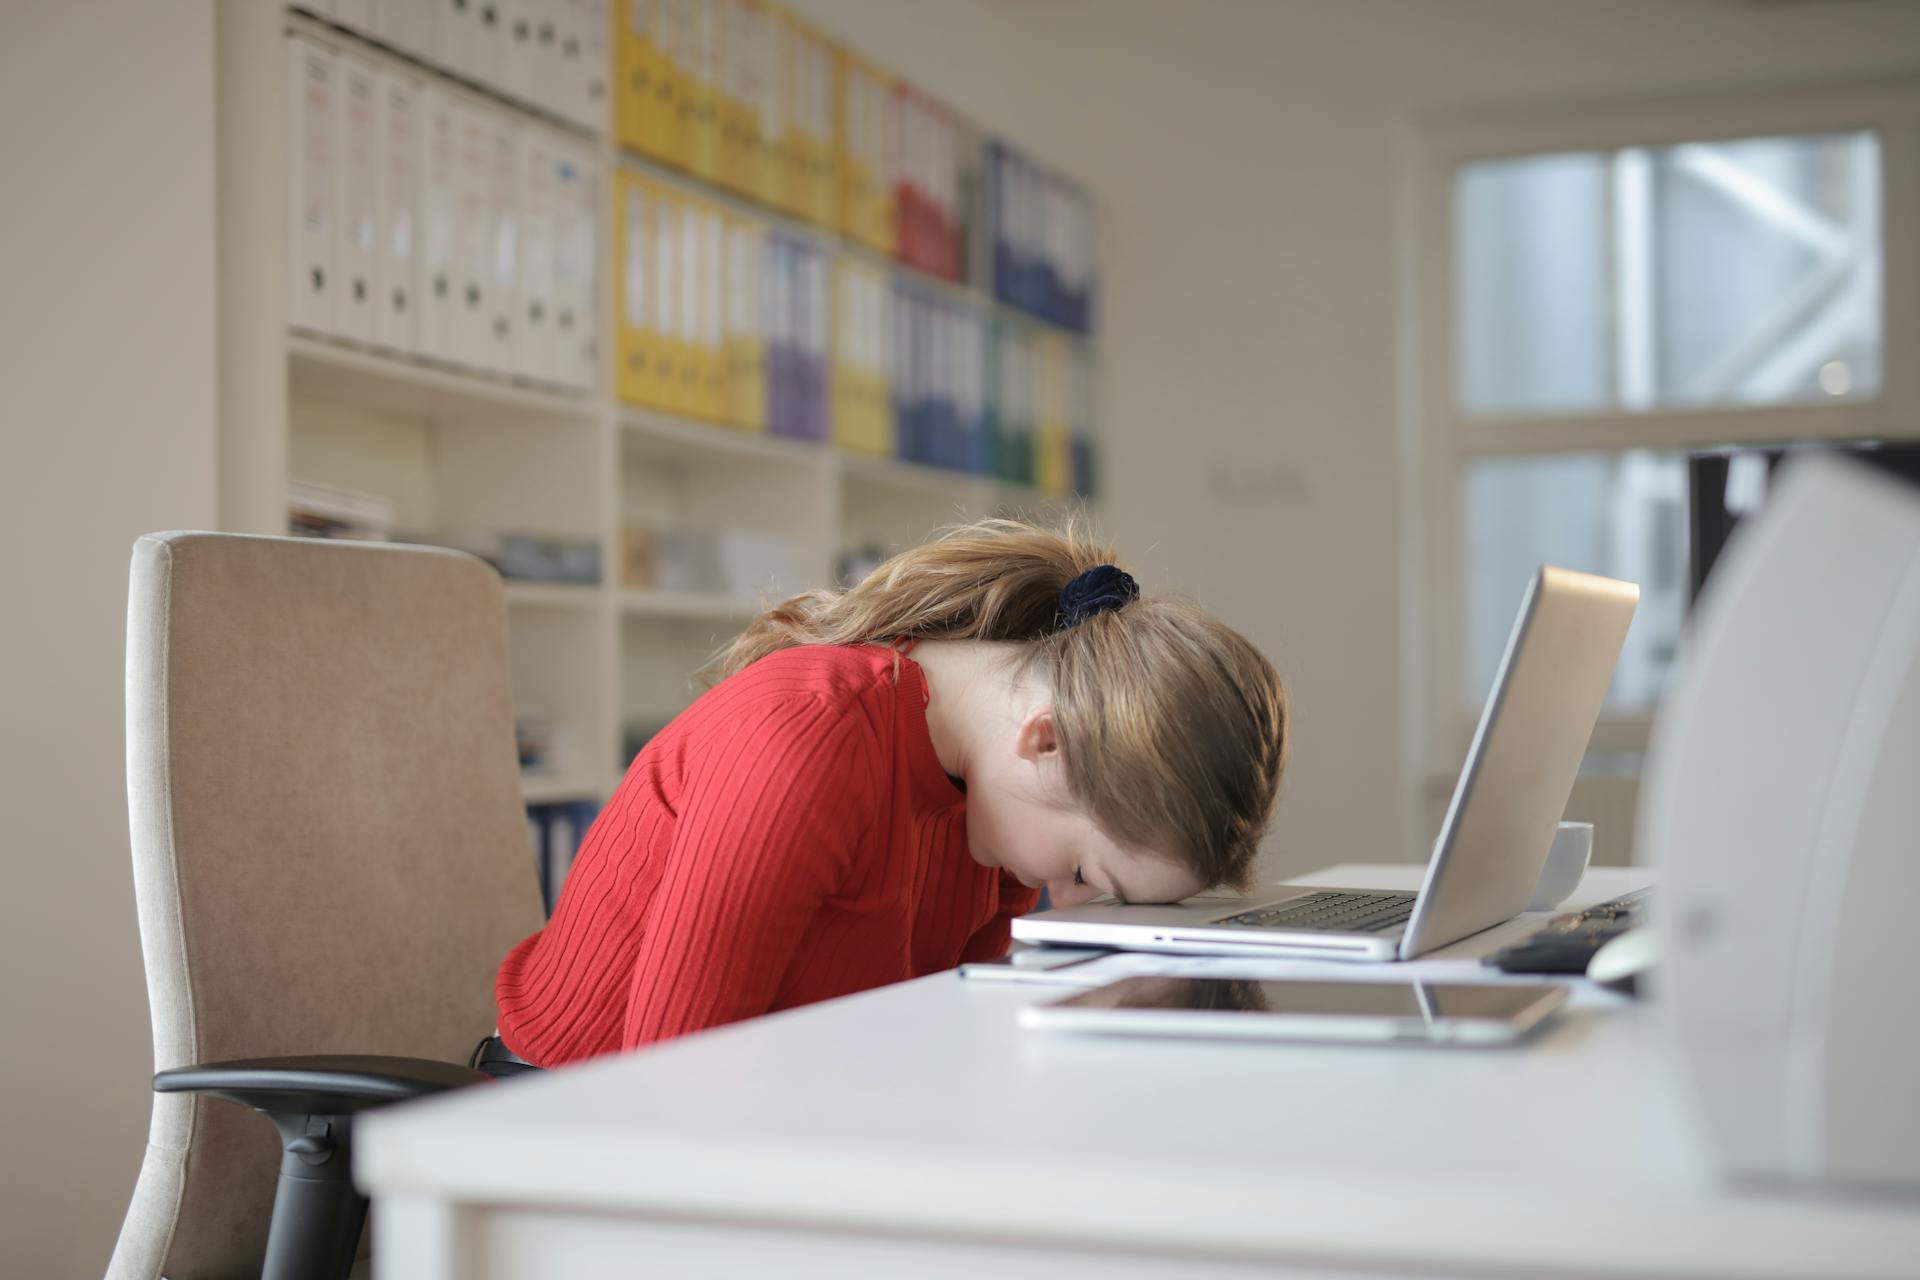 A woman putting her head on her desk | Source: Pexels